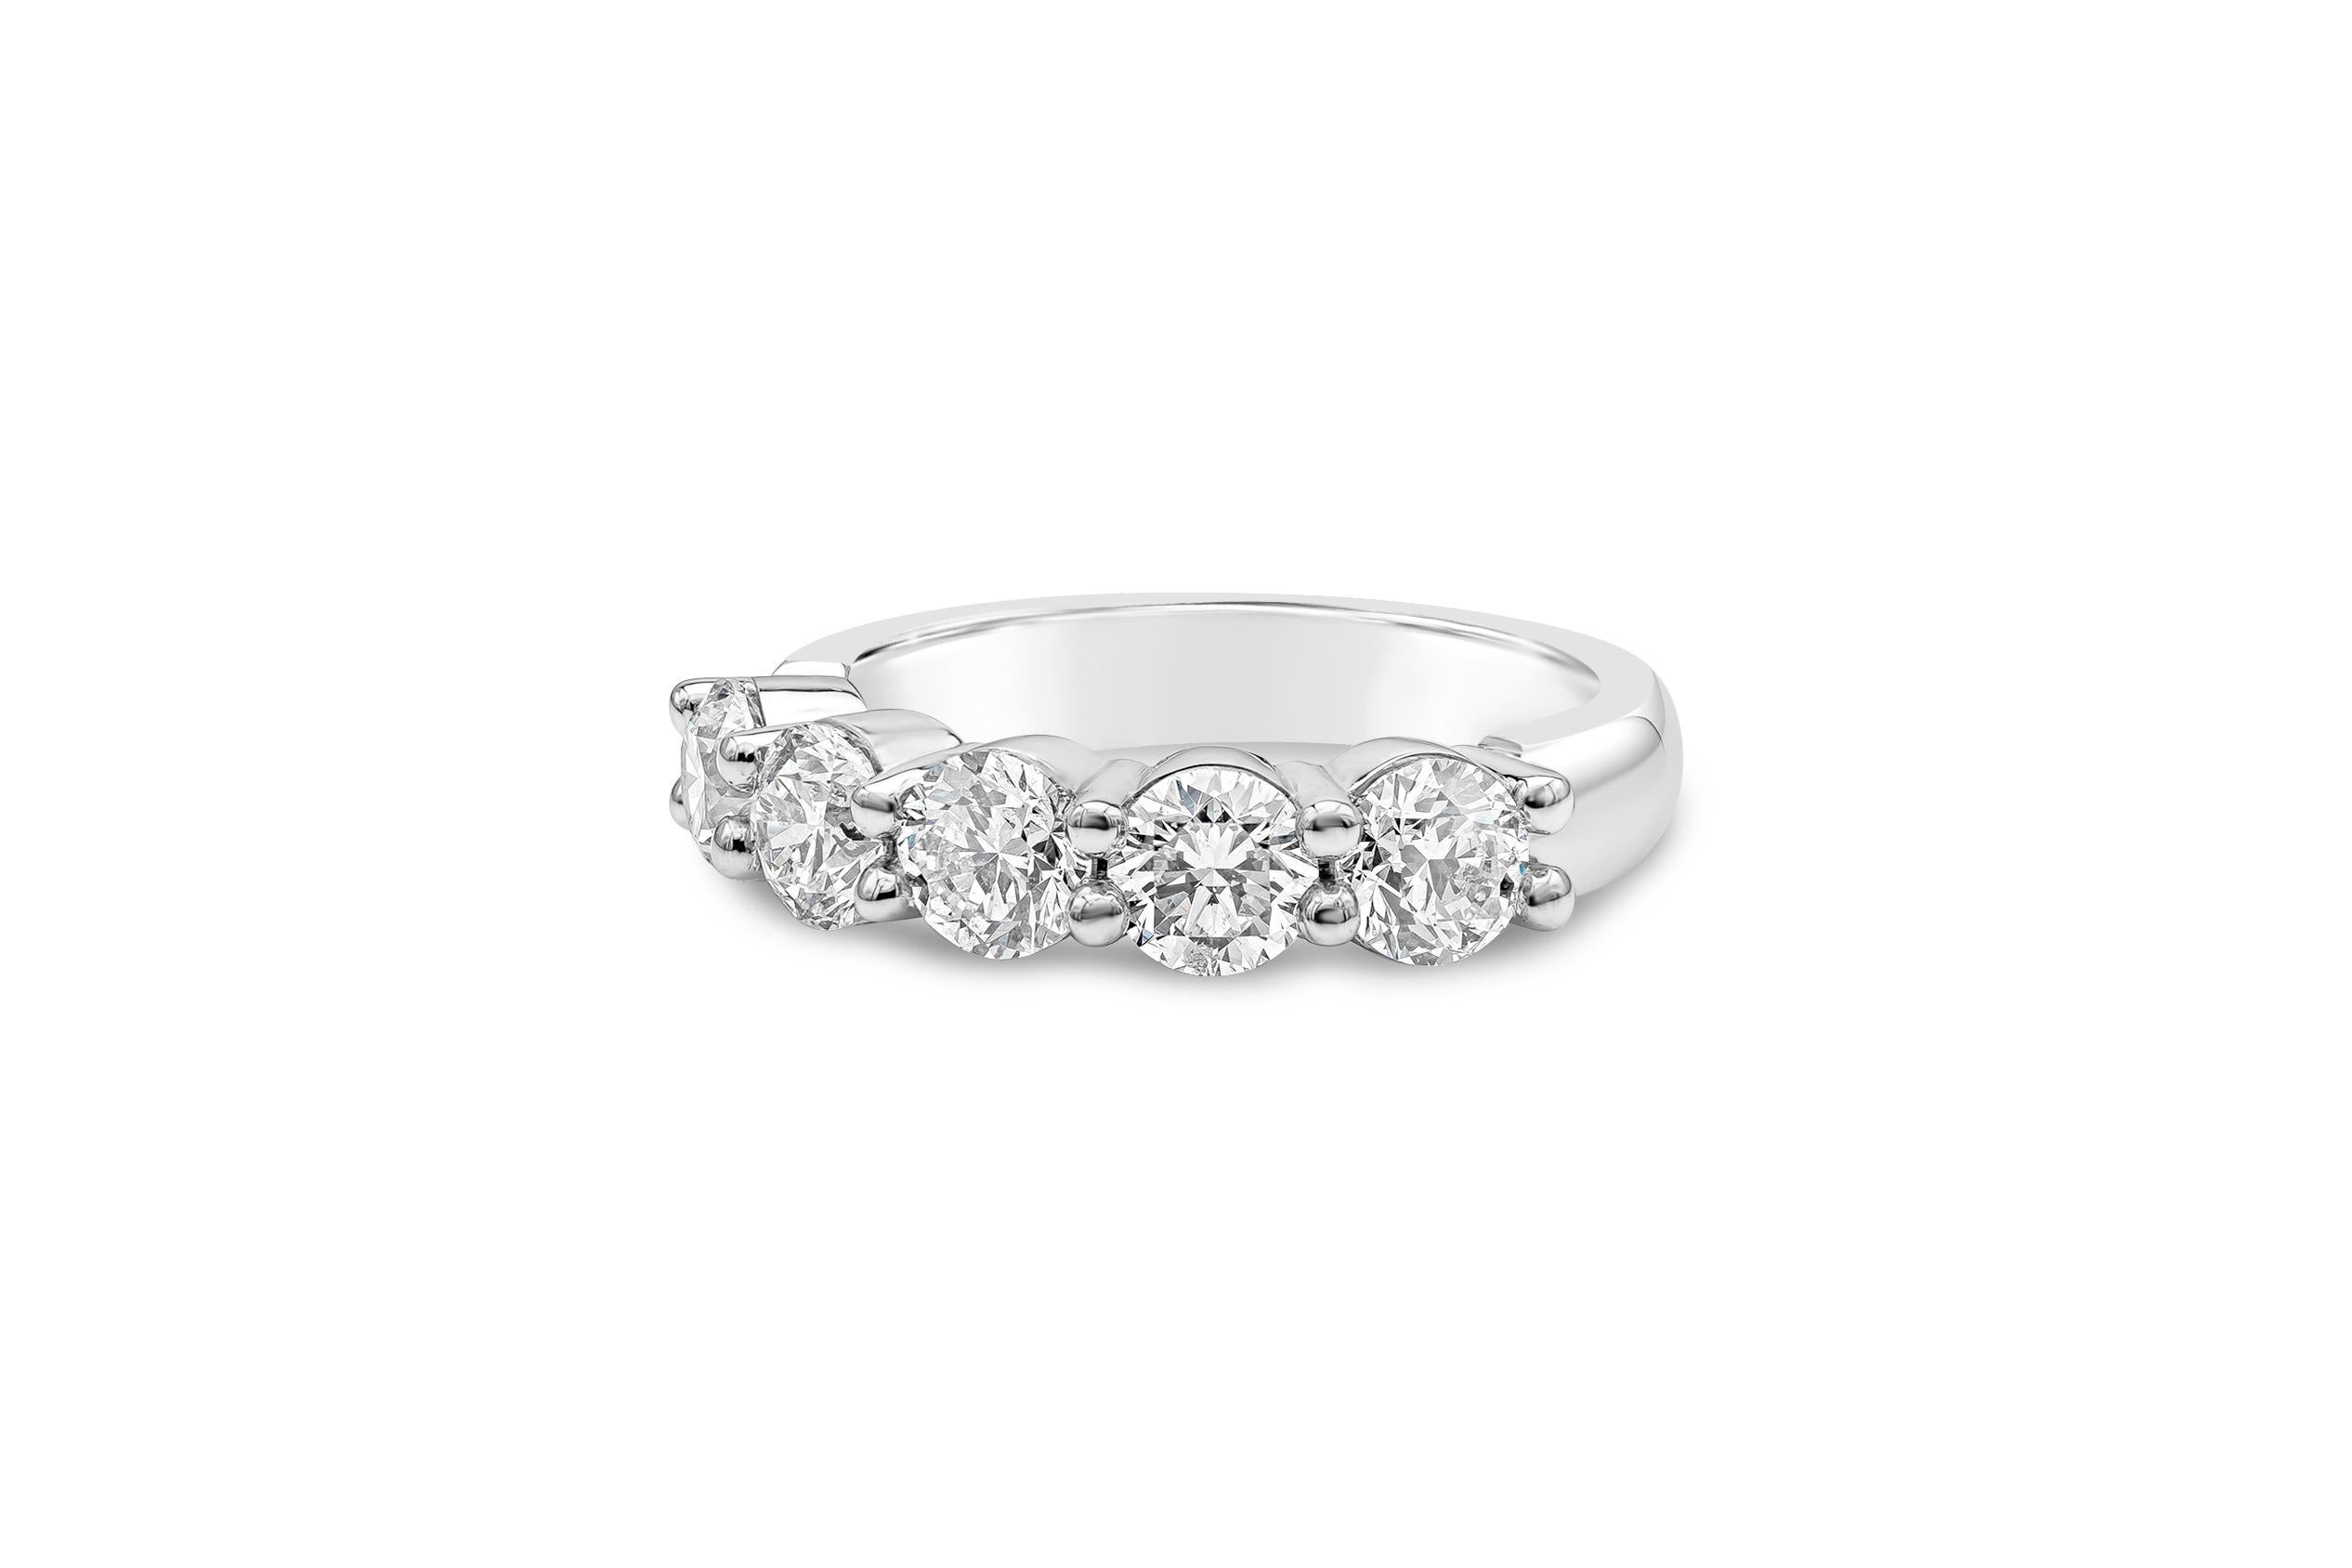 A classic wedding band style showcasing five round brilliant diamonds set in a shared prong. Diamonds weigh 2.02 carats total, E-F Color and SI in Clarity. Made with Platinum. Size 6 US.

Style available in different price ranges. Prices are based